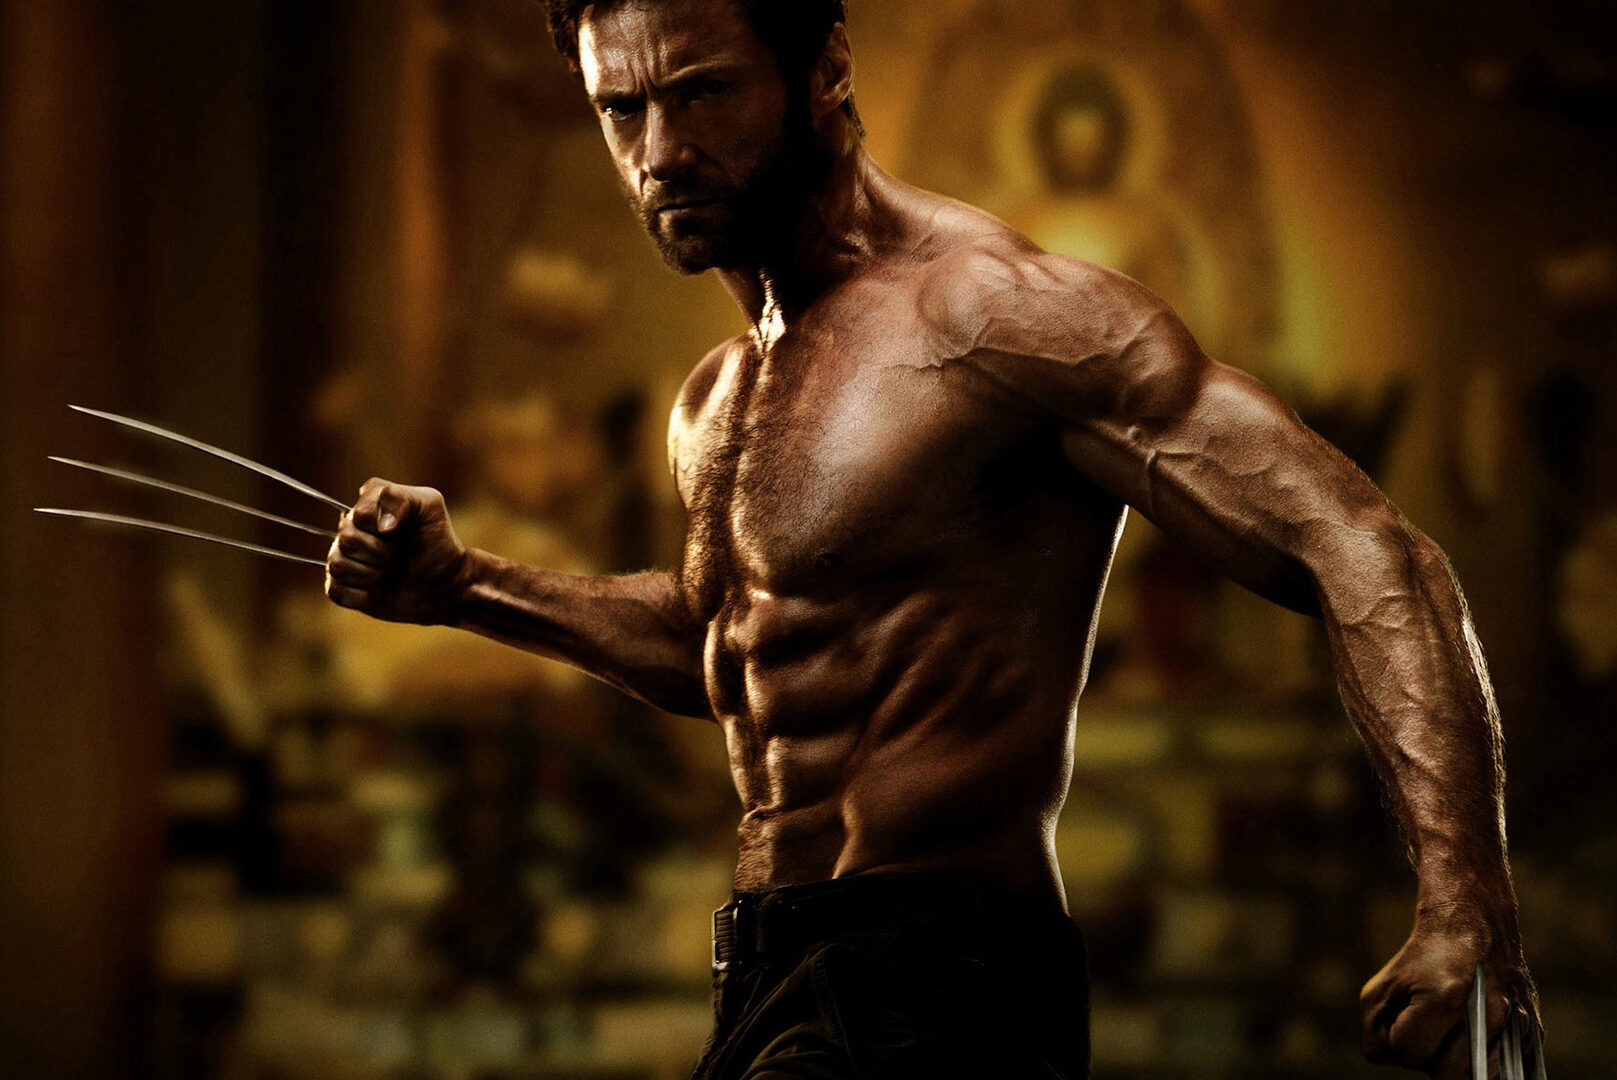 Hugh Jackman Wolverine Roles That Actors Absolutely Crushed